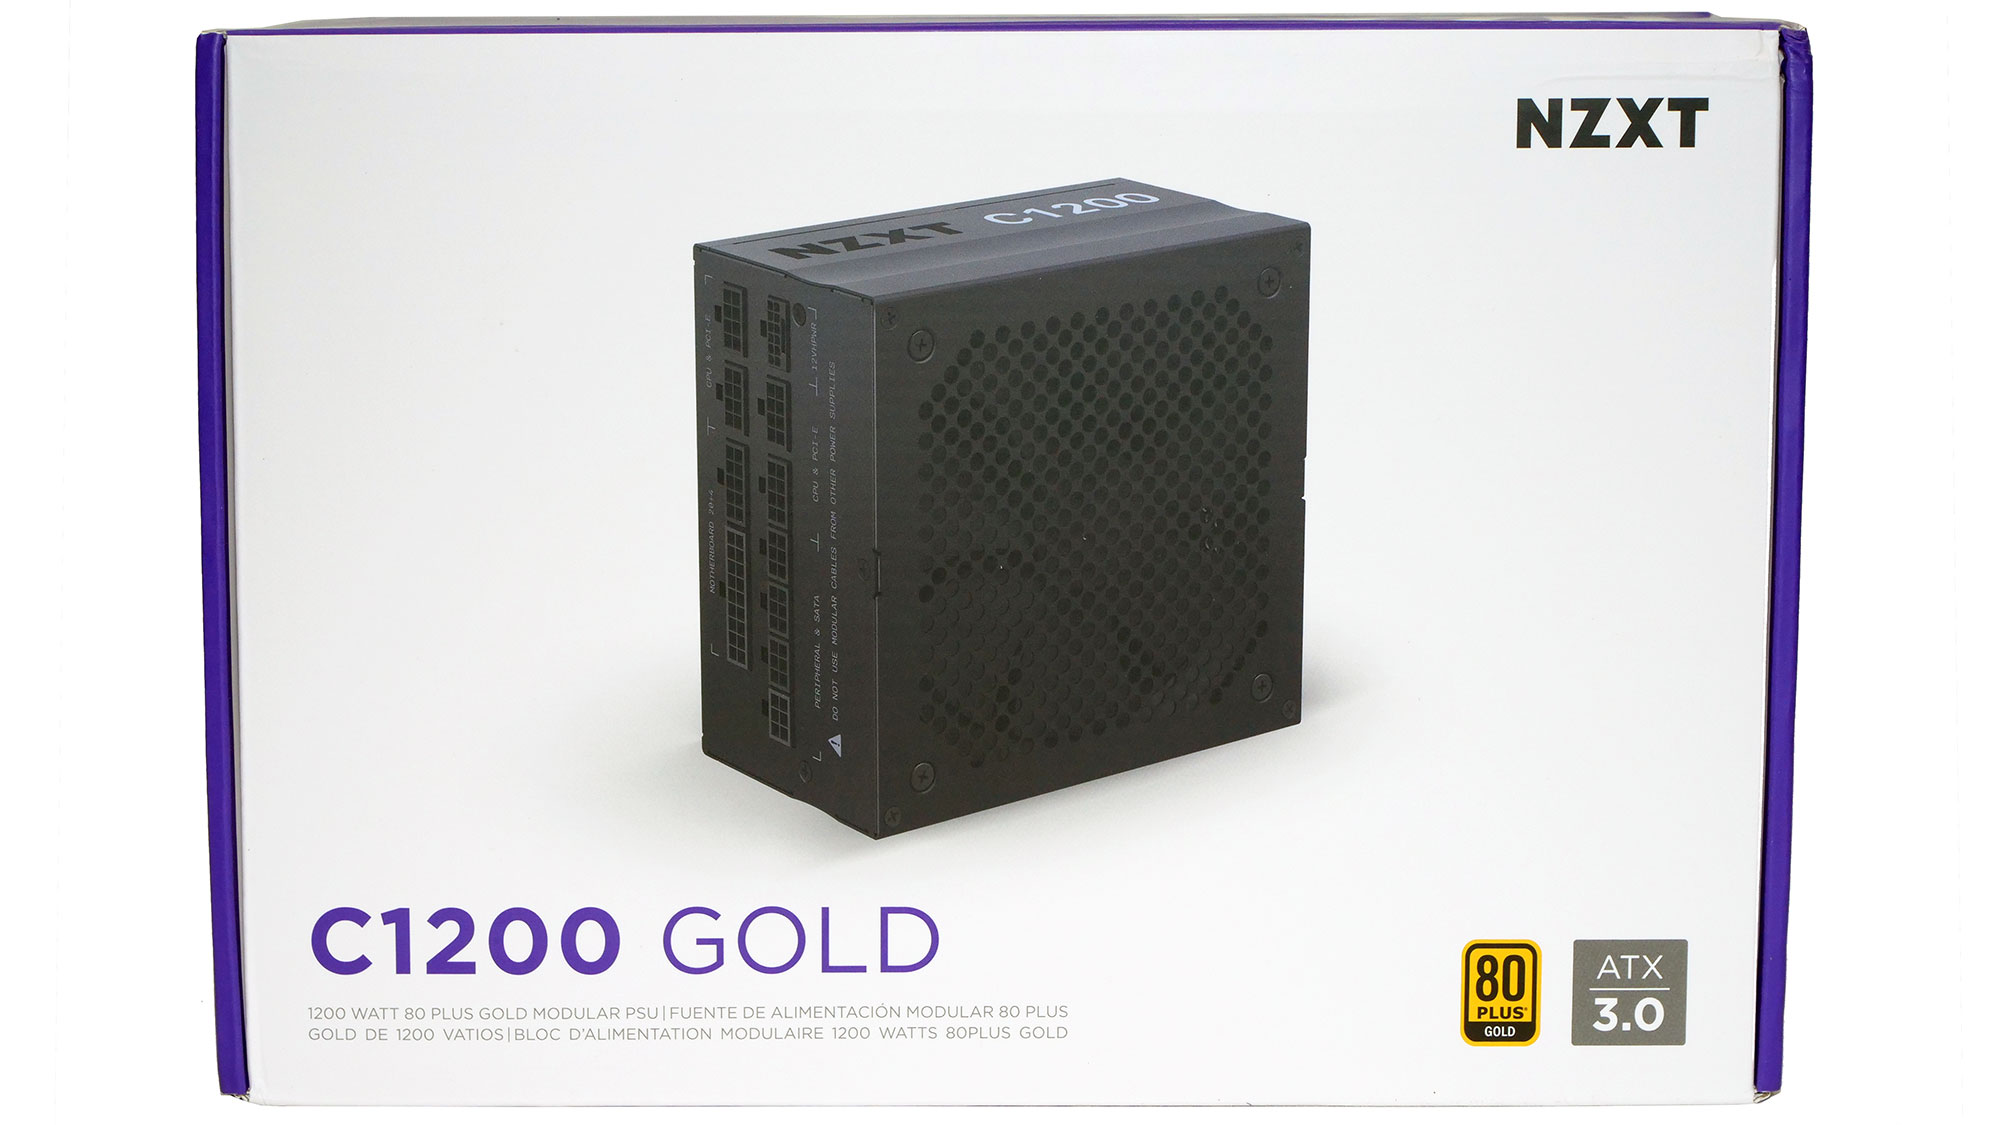 NZXT C1200 Gold 1200 W Review - Photos & Cables